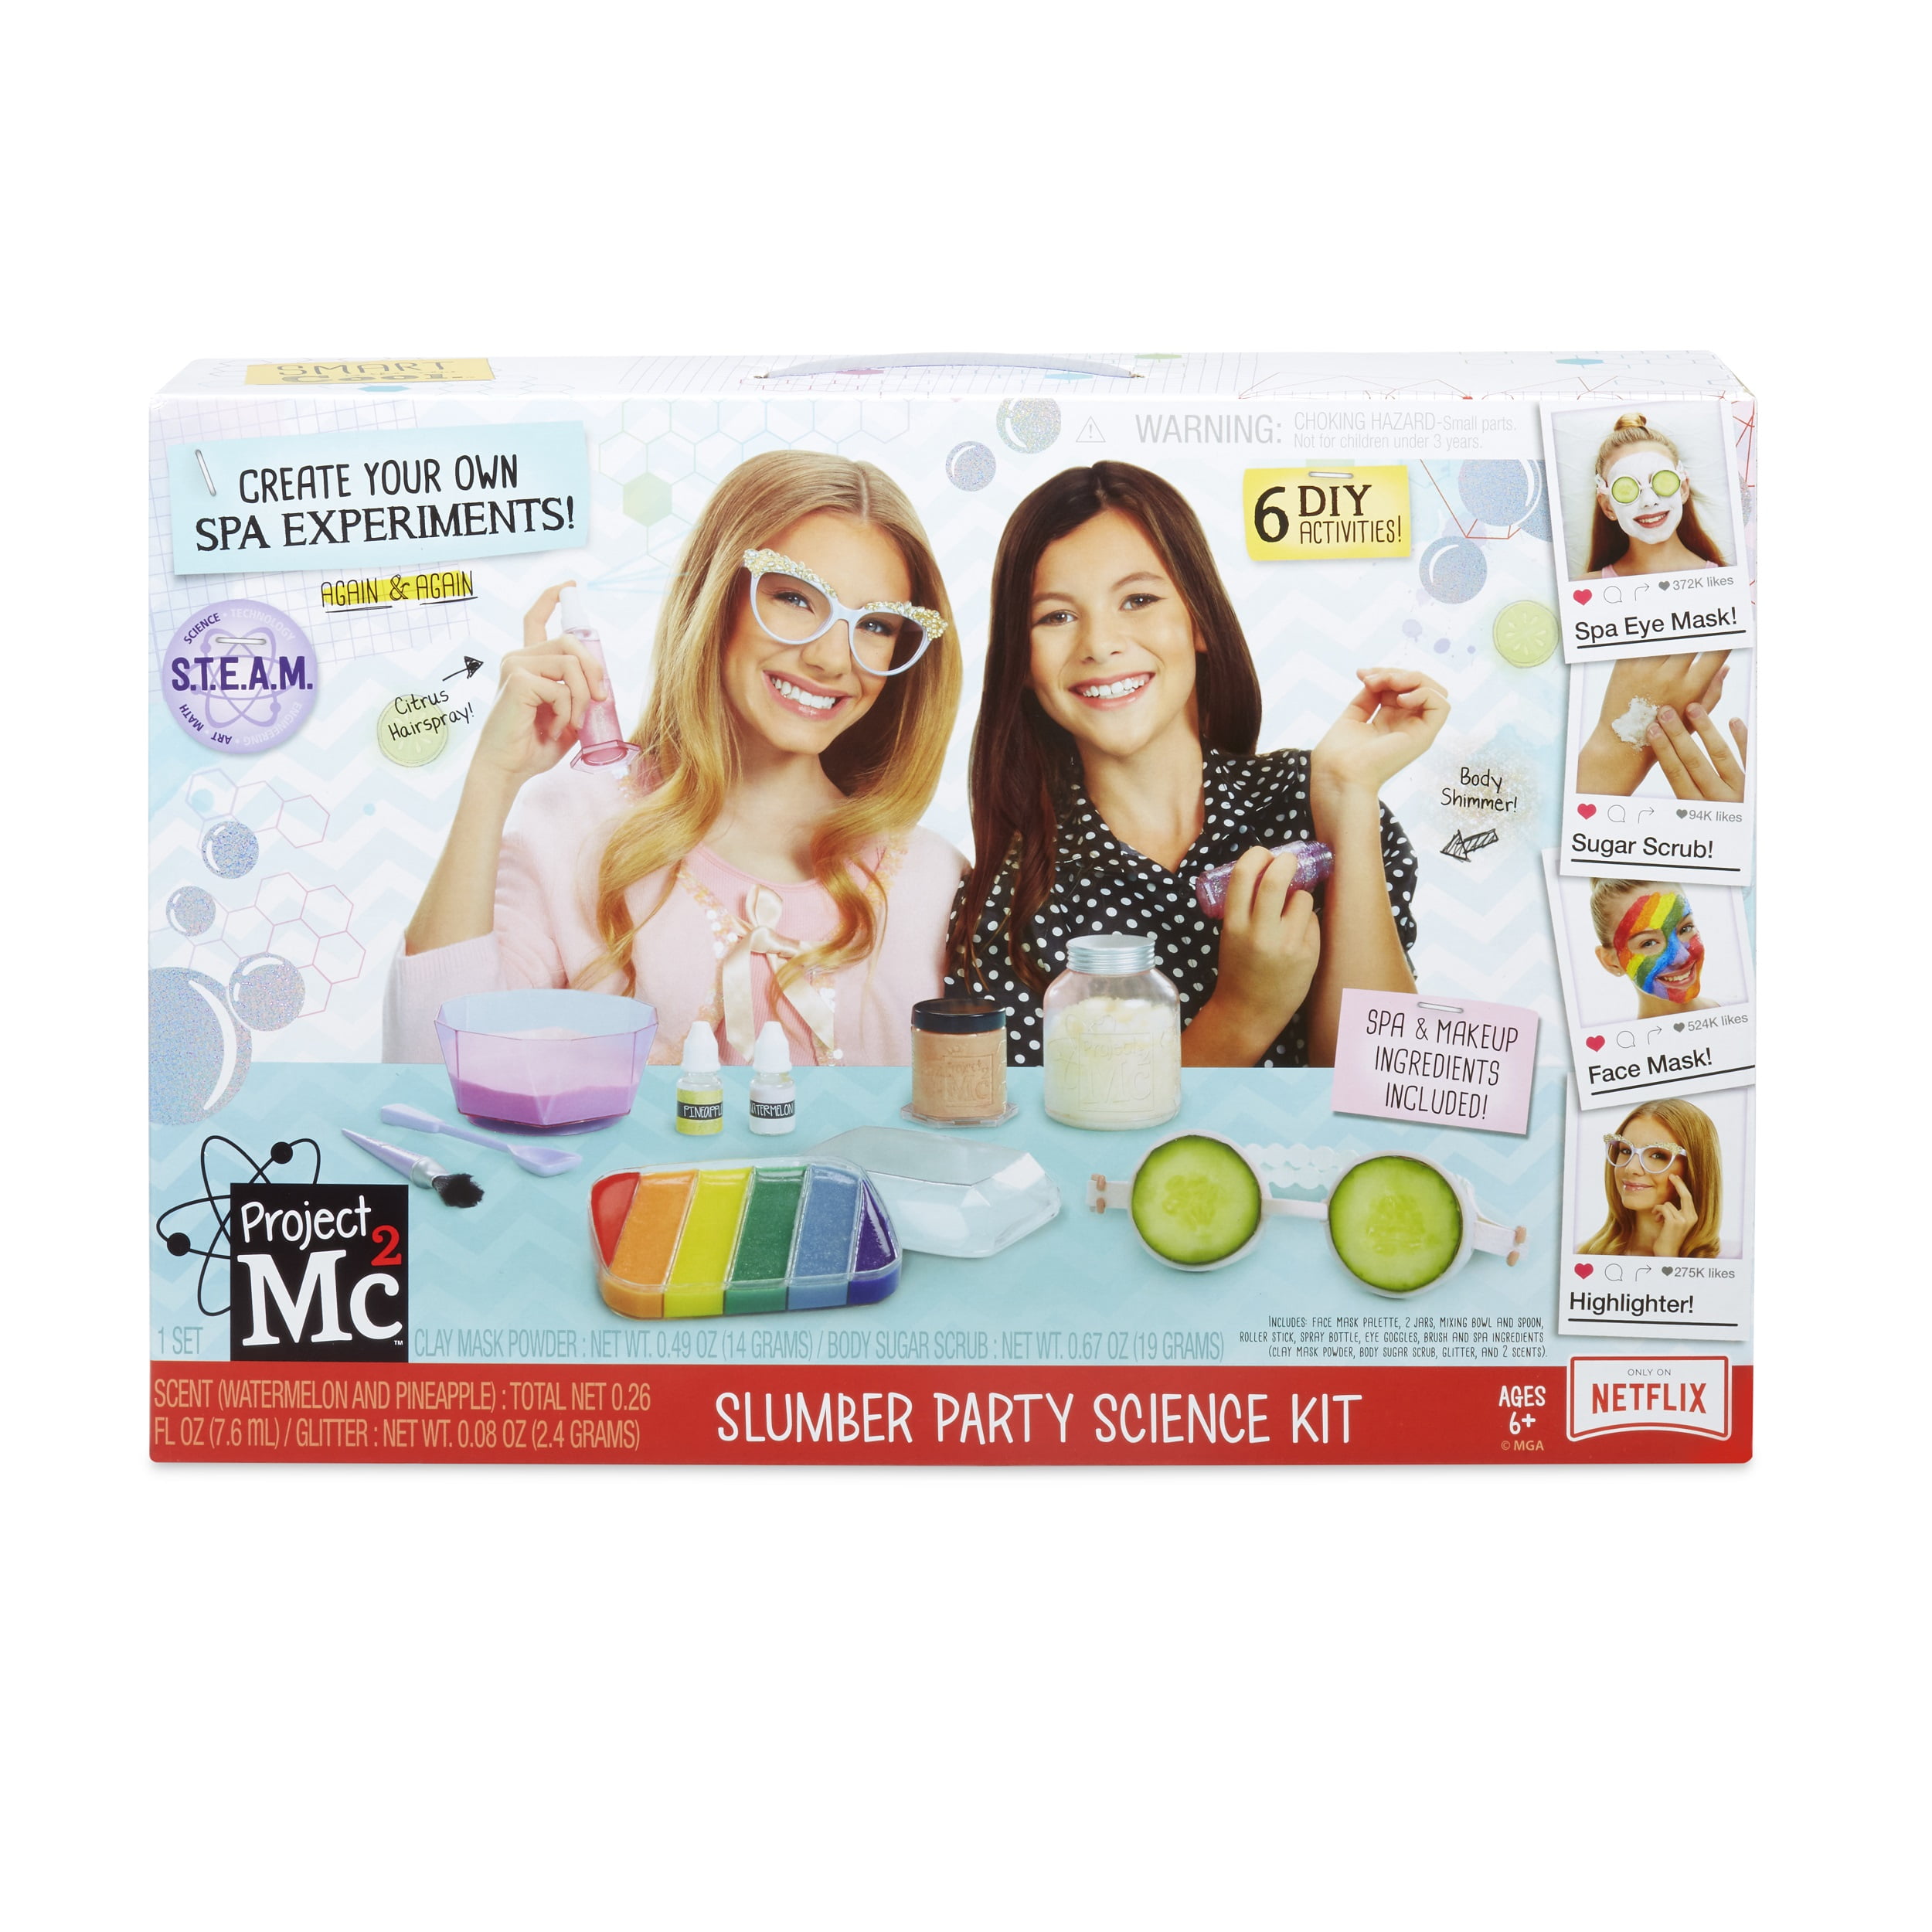 SPA'MAZING MIX YOUR OWN SPA TREATMENTS KIDS BEAUTY & CHEMISTRY SCIENCE KIT 